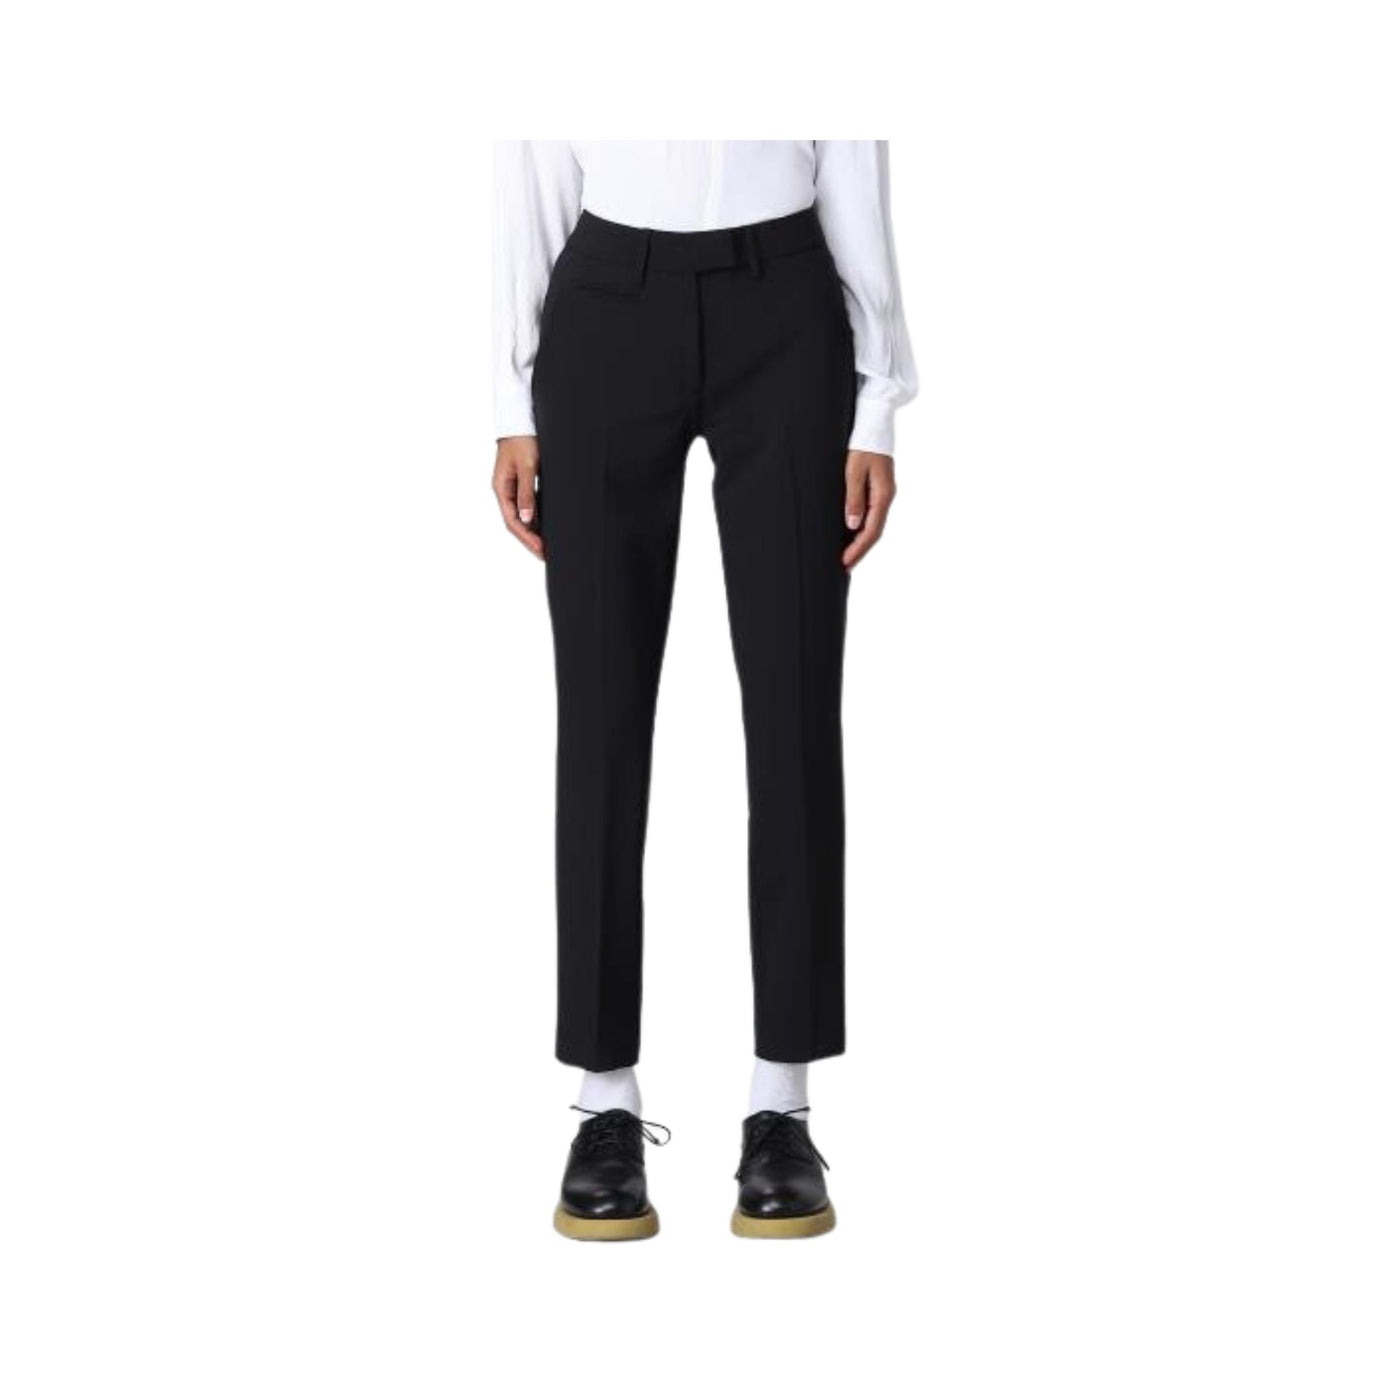 Classic women's trousers with slant pockets